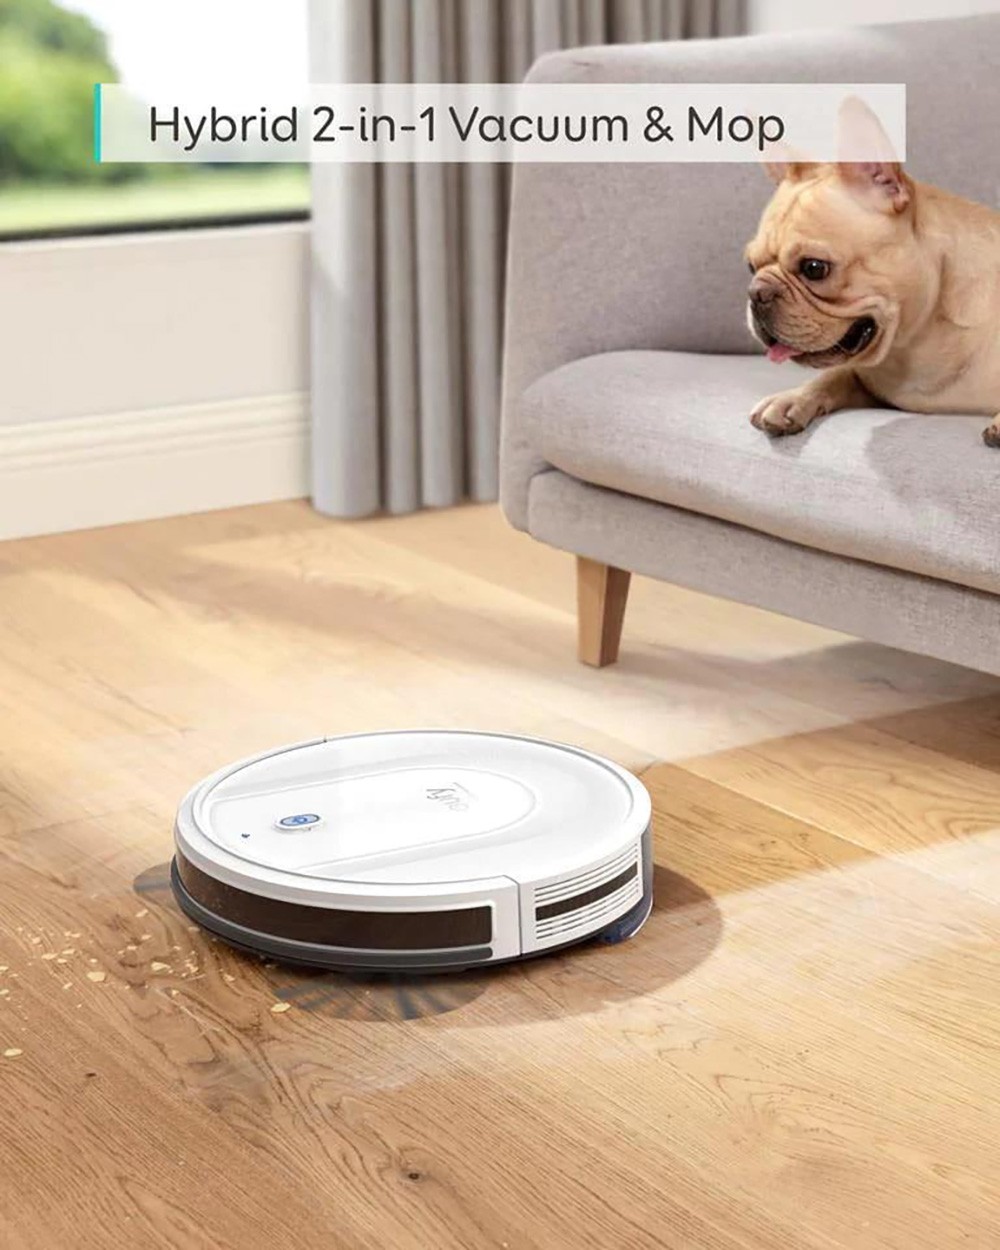 eufy G10 Hybrid Robot Vacuum Cleaner, 2000Pa Suction, Smart Dynamic Navigation, 450ml Dust Collector, Up to 100 Mins Runtime, App/Voice Control